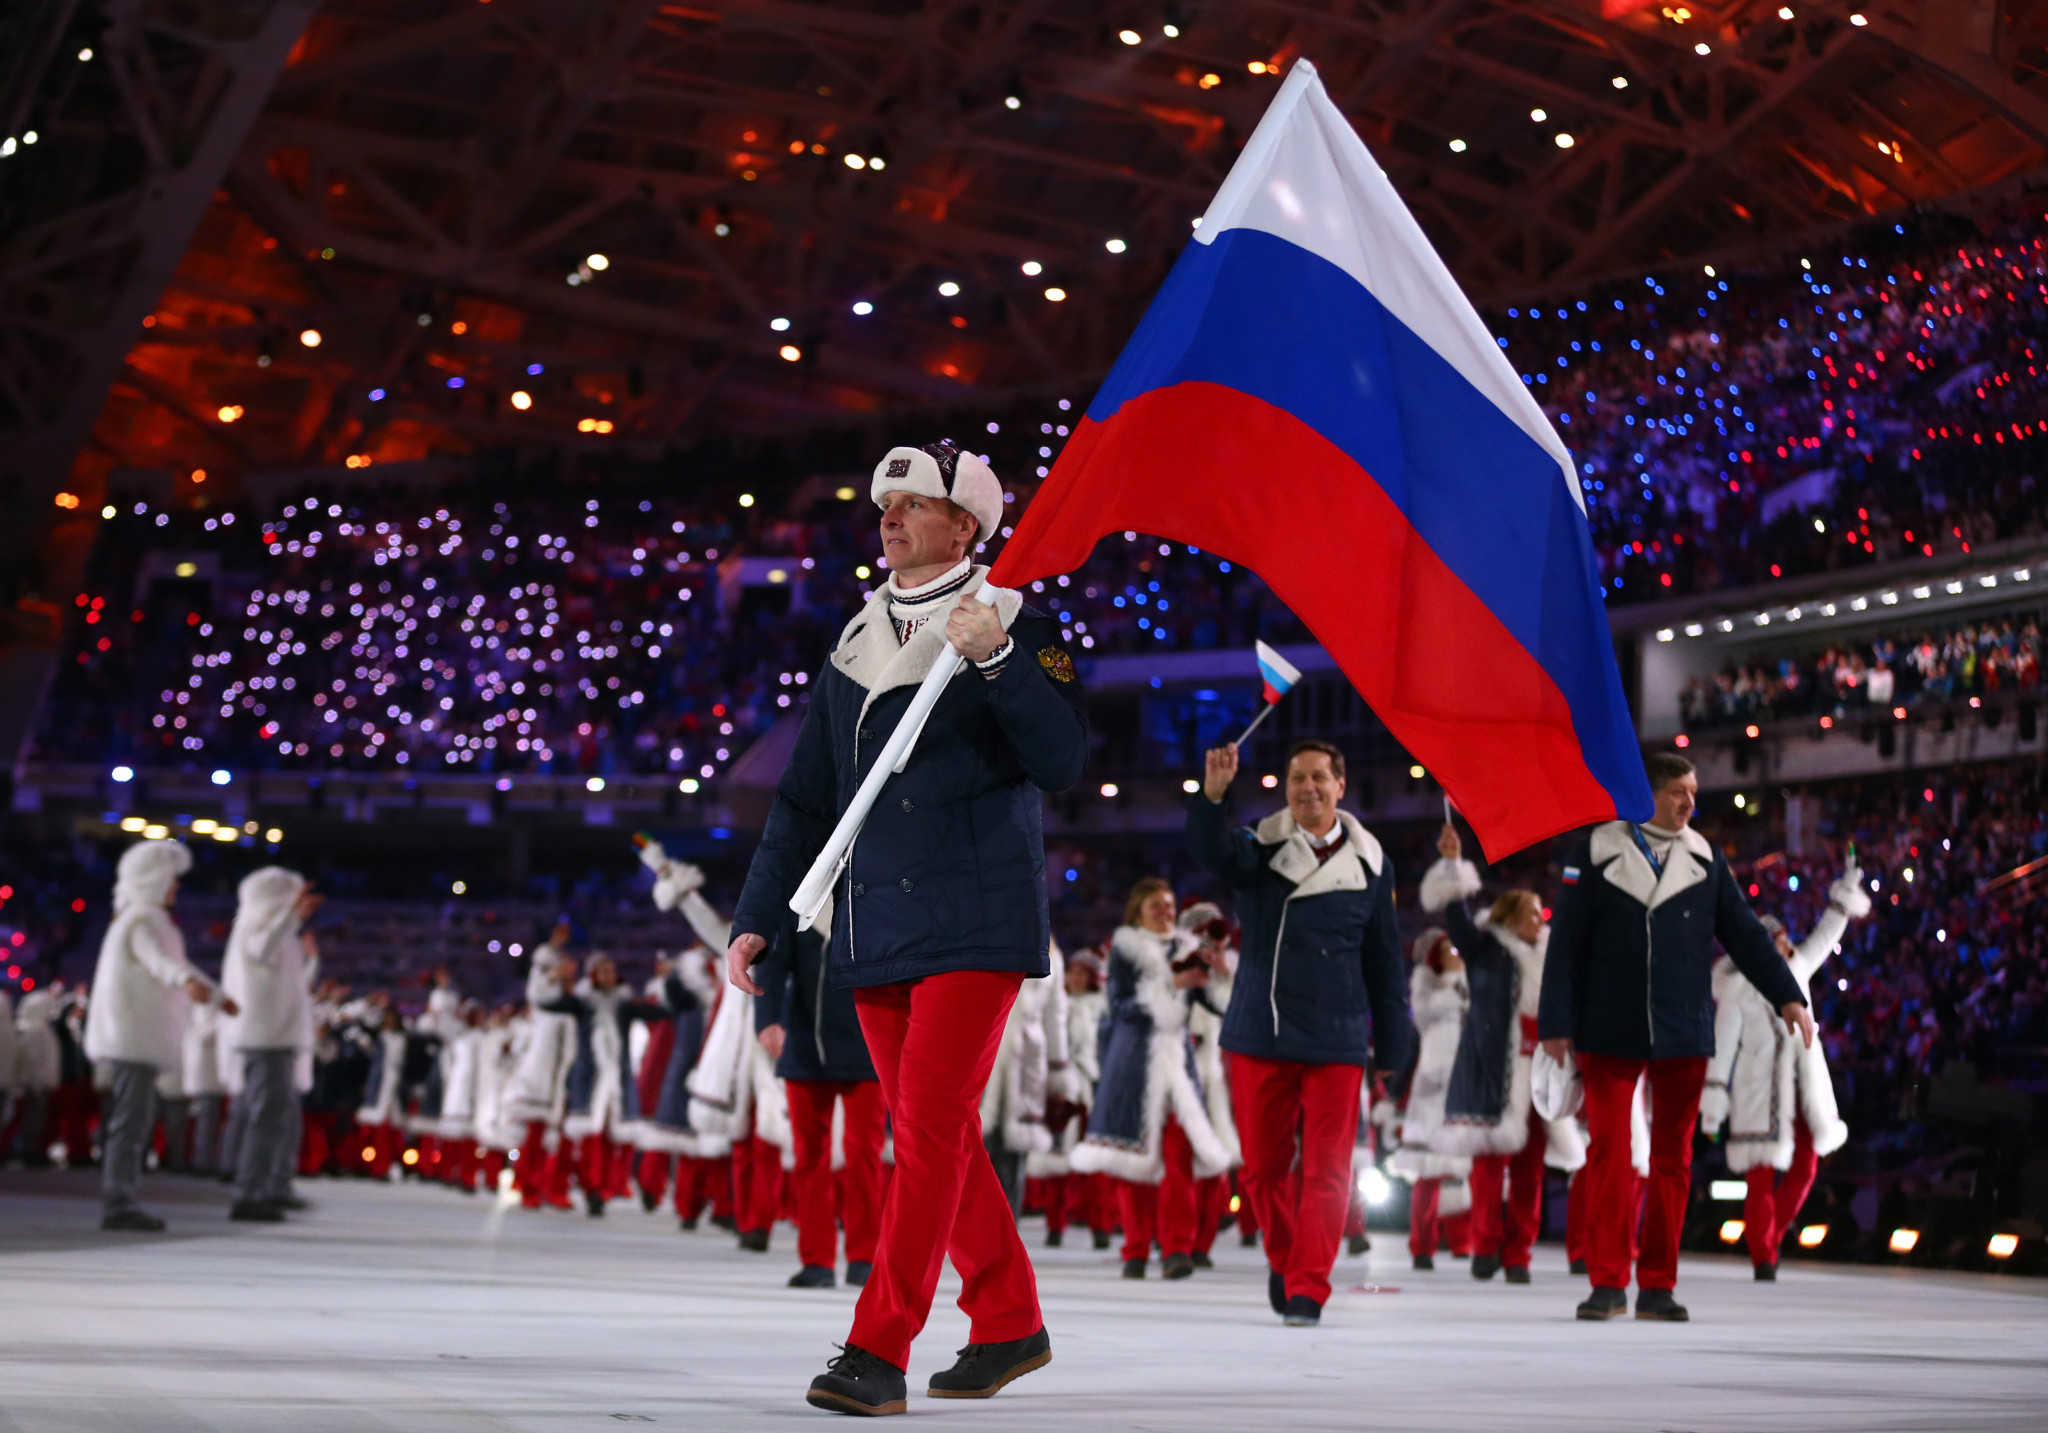 A verdict is still expected against Russian athletes, including double Olympic gold medallist Alexander Zubkov, who carried his country's flag at the Opening Ceremony of Sochi 2014 ©Getty Images